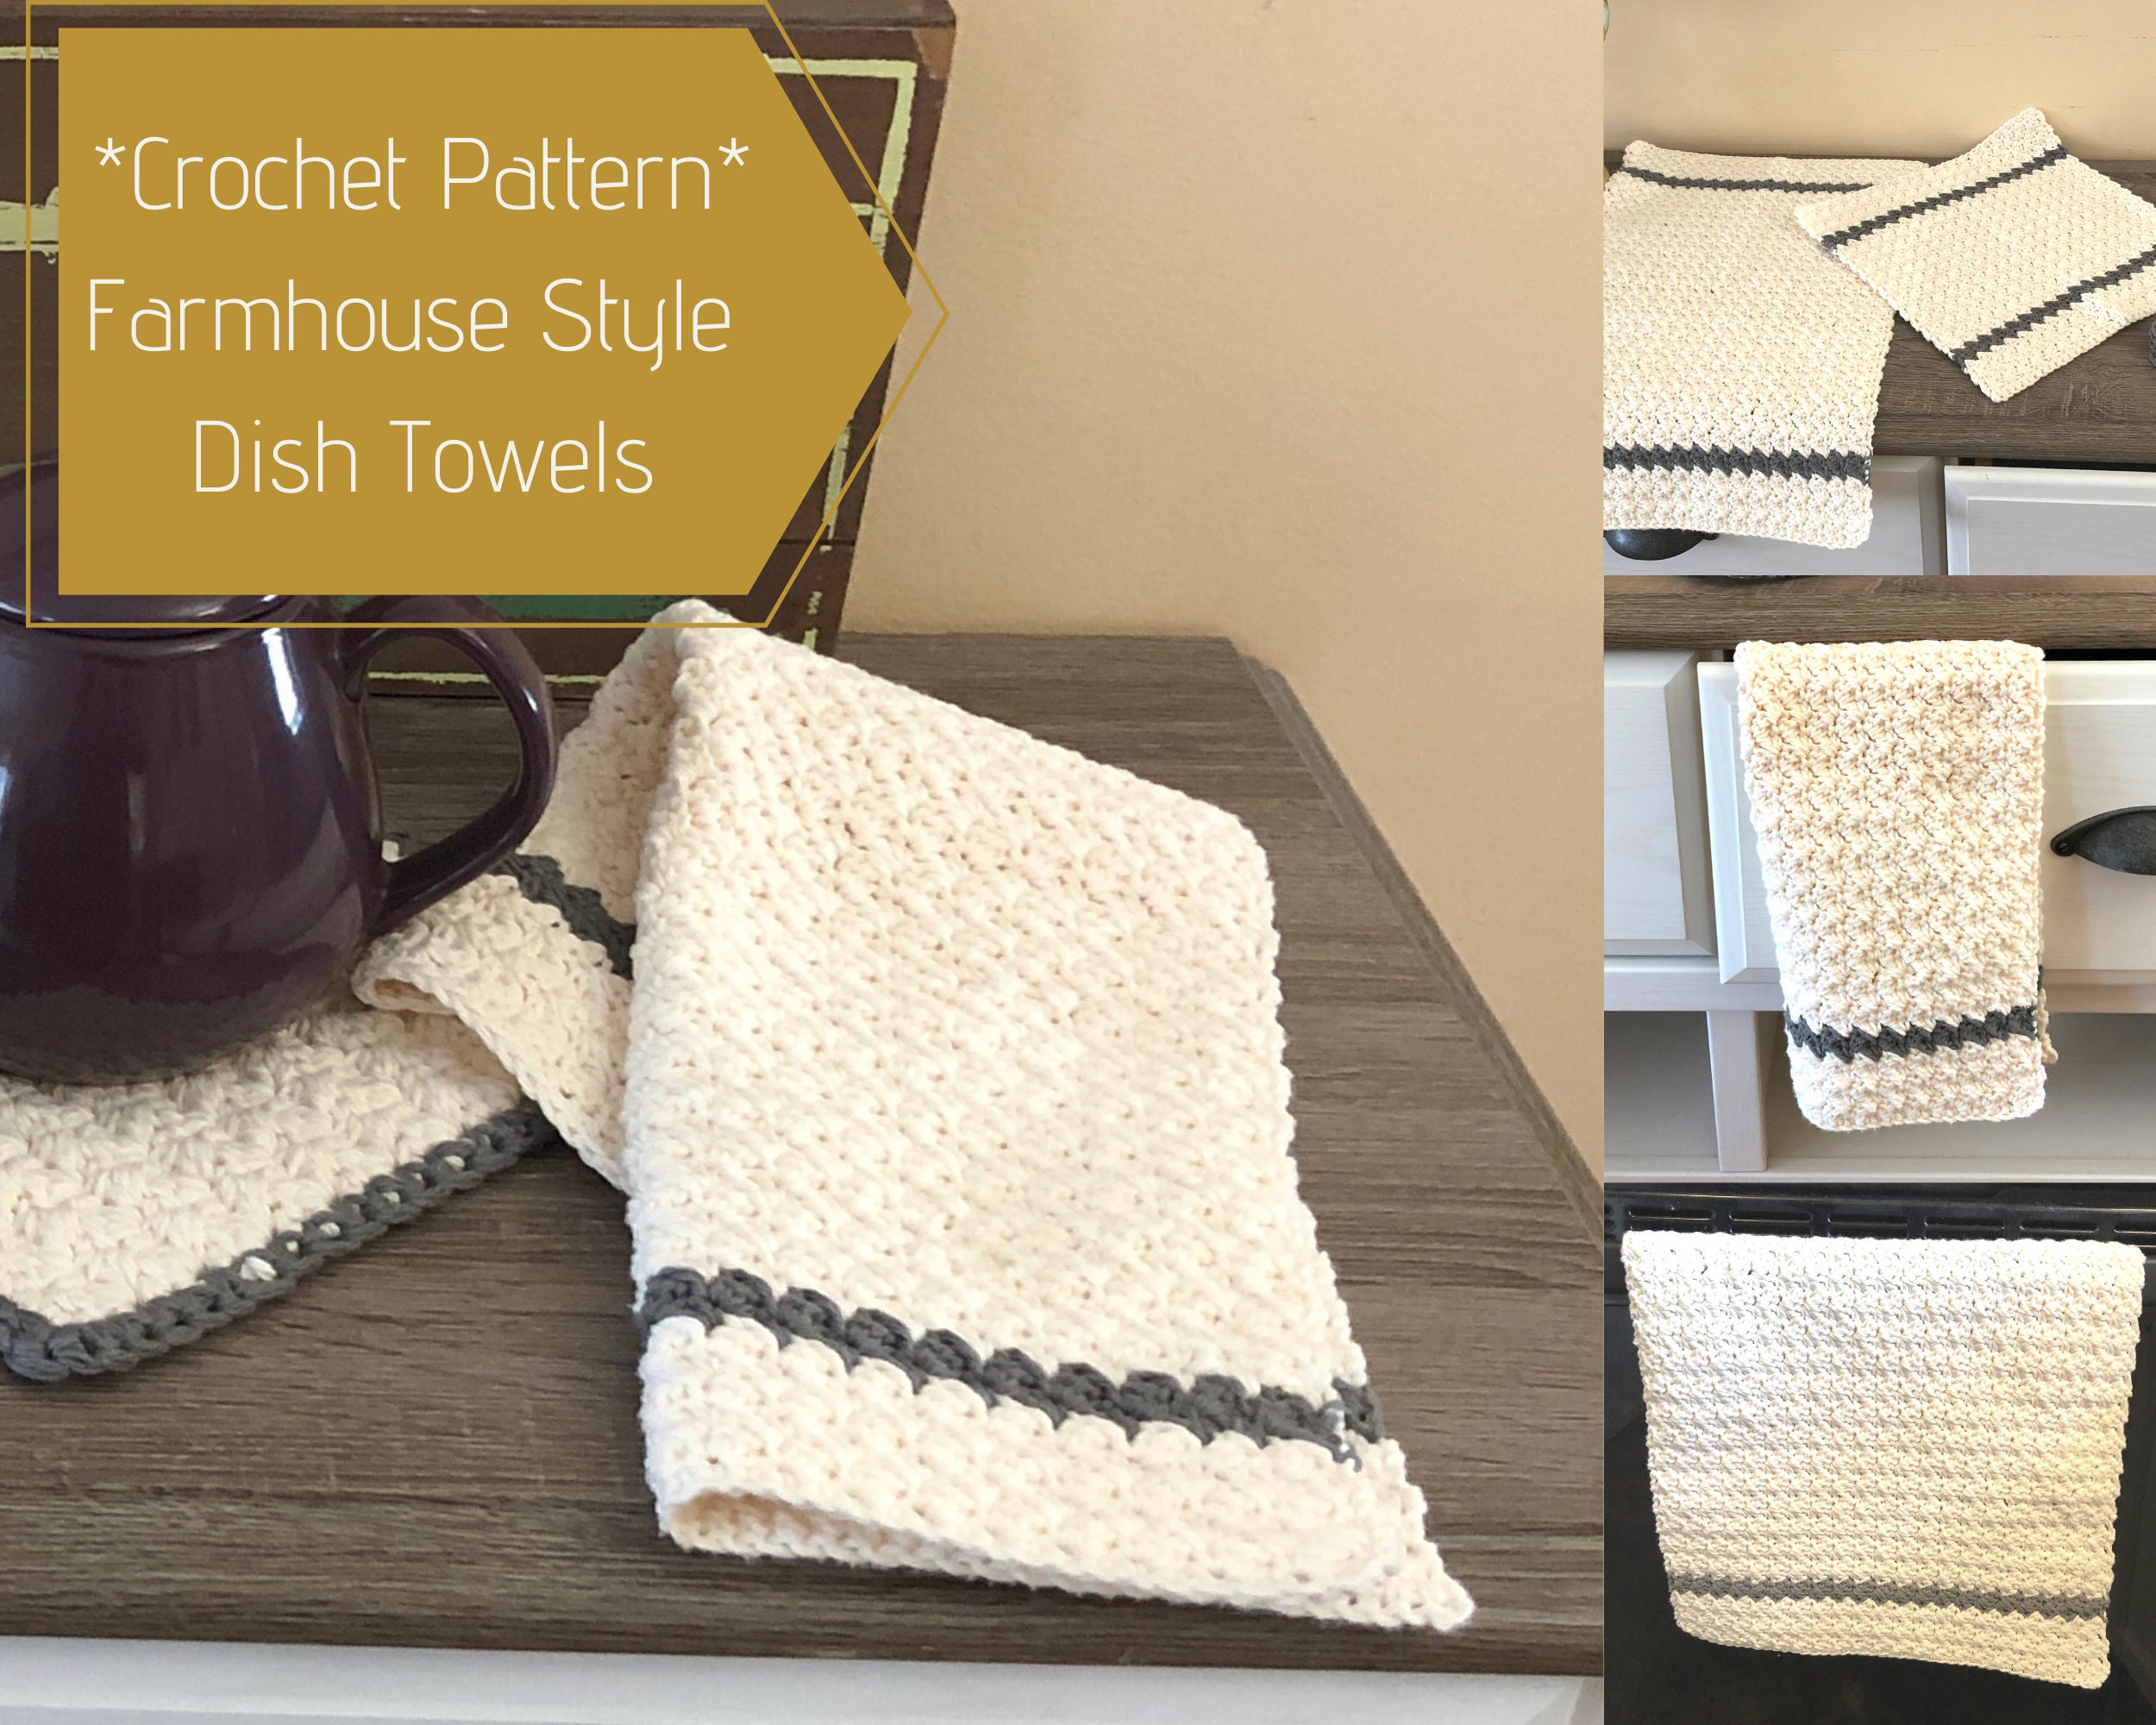 Dish Drying Mats Towels - Highland Hickory Designs - Free Pattern